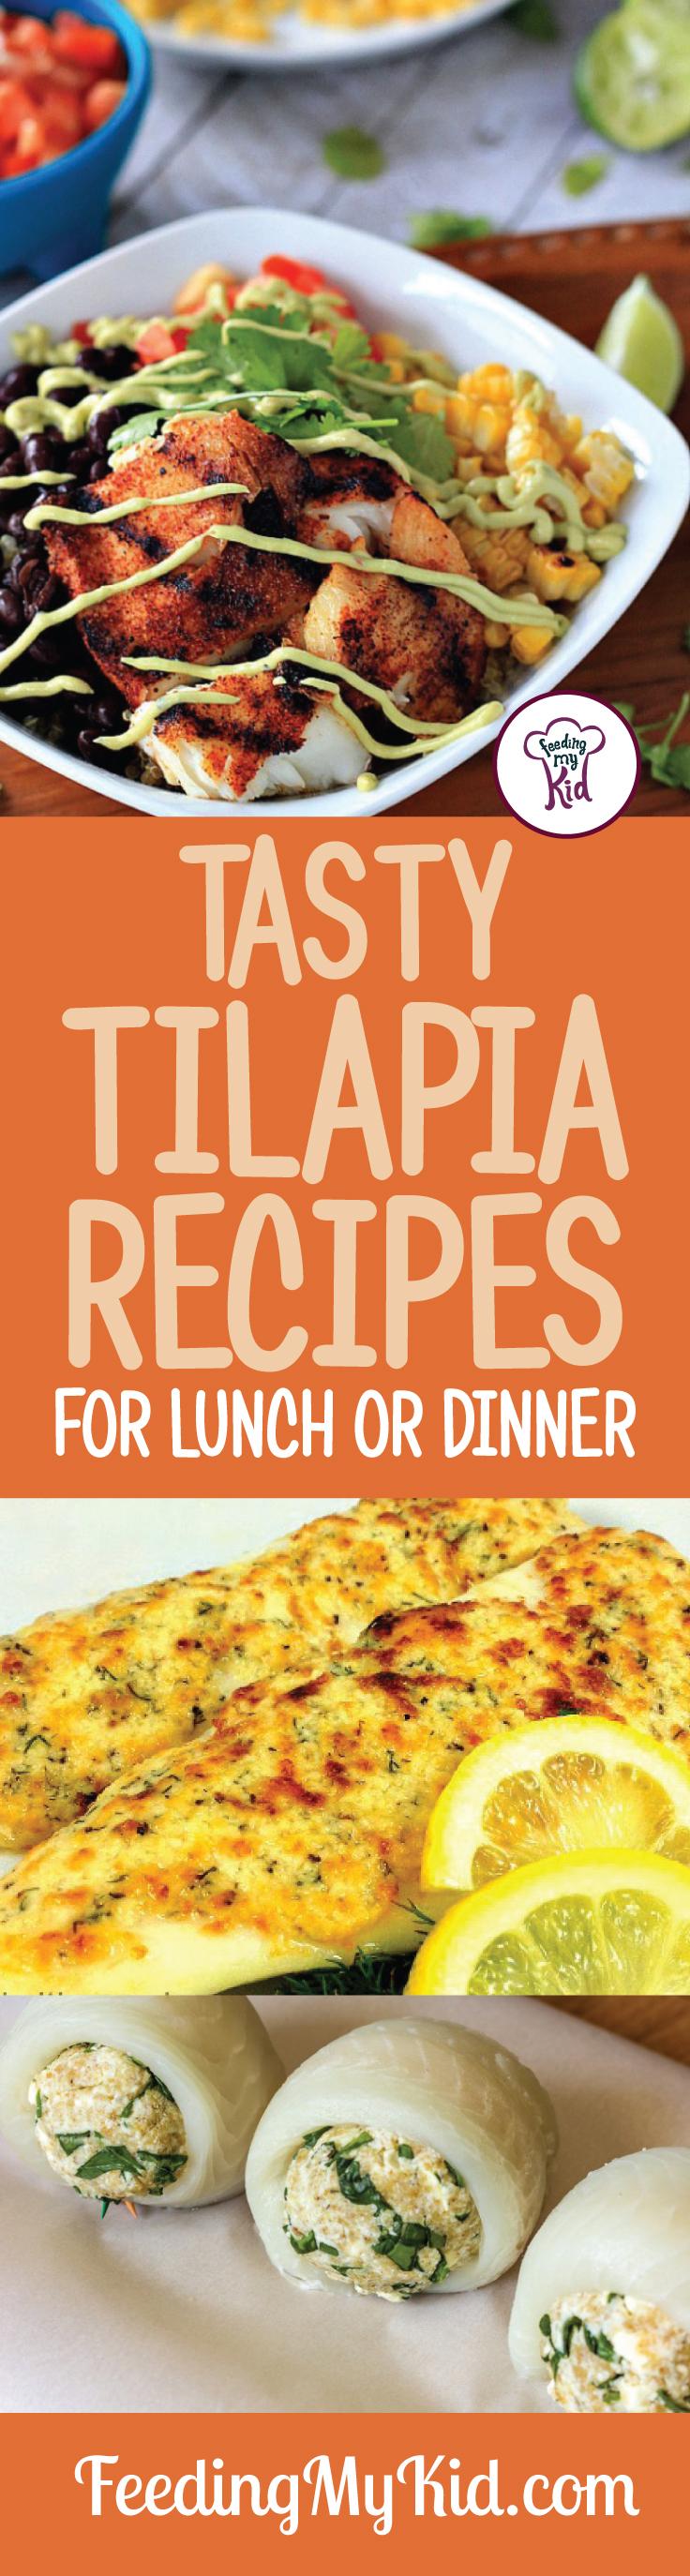 Try these amazing tilapia recipes that are high in protein, low in fat and great in taste! Feeding My Kid is a filled with all the information you need about how to raise your kids, from healthy tips to nutritious recipes. #FeedingMyKid #TilapiaRecipes #Recipes